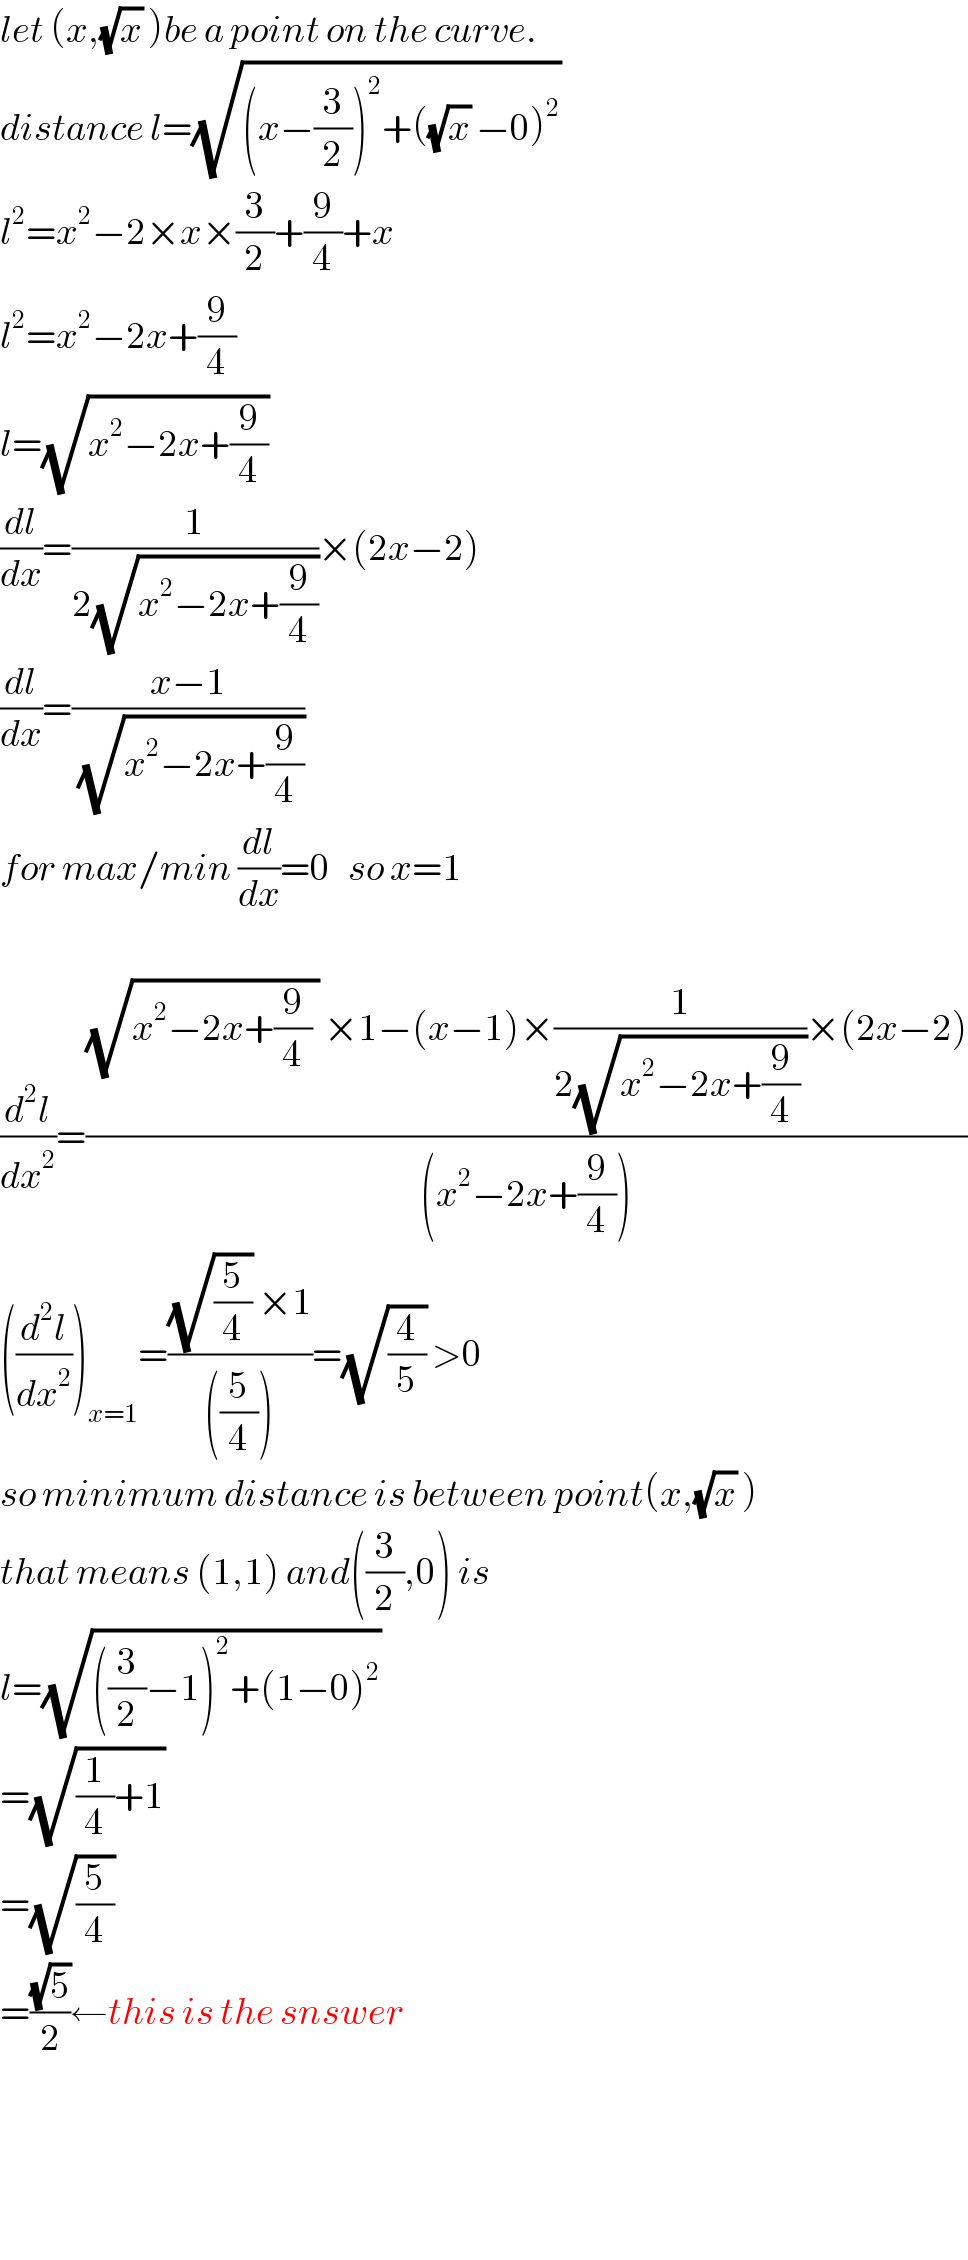 let (x,(√x) )be a point on the curve.  distance l=(√((x−(3/2))^2 +((√x) −0)^2 ))   l^2 =x^2 −2×x×(3/2)+(9/4)+x  l^2 =x^2 −2x+(9/4)  l=(√(x^2 −2x+(9/4)))   (dl/dx)=(1/(2(√(x^2 −2x+(9/4)))))×(2x−2)  (dl/dx)=((x−1)/(√(x^2 −2x+(9/4))))  for max/min (dl/dx)=0   so x=1    (d^2 l/dx^2 )=(((√(x^2 −2x+(9/4) )) ×1−(x−1)×(1/(2(√(x^2 −2x+(9/4) ))))×(2x−2))/((x^2 −2x+(9/4))))  ((d^2 l/dx^2 ))_(x=1) =(((√(5/4)) ×1)/(((5/4))))=(√(4/5)) >0  so minimum distance is between point(x,(√x) )  that means (1,1) and((3/2),0) is  l=(√(((3/2)−1)^2 +(1−0)^2 ))   =(√((1/4)+1))   =(√(5/4))   =((√5)/2)←this is the snswer        